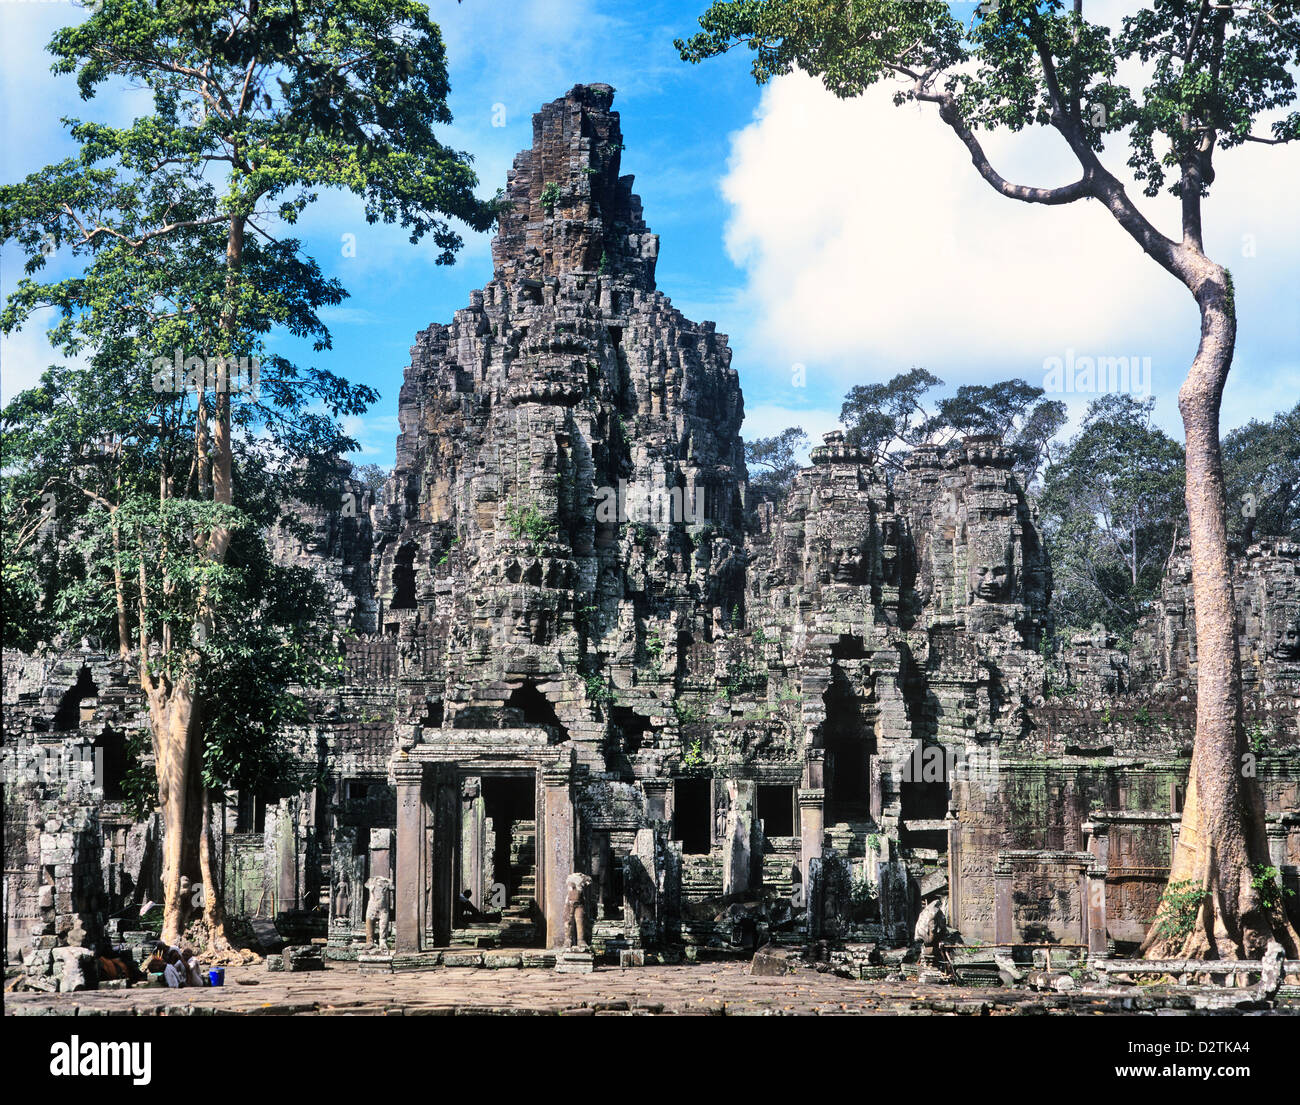 Cambodia, Angkor Thom, view of the galleries and towers at Bayon Temple Stock Photo